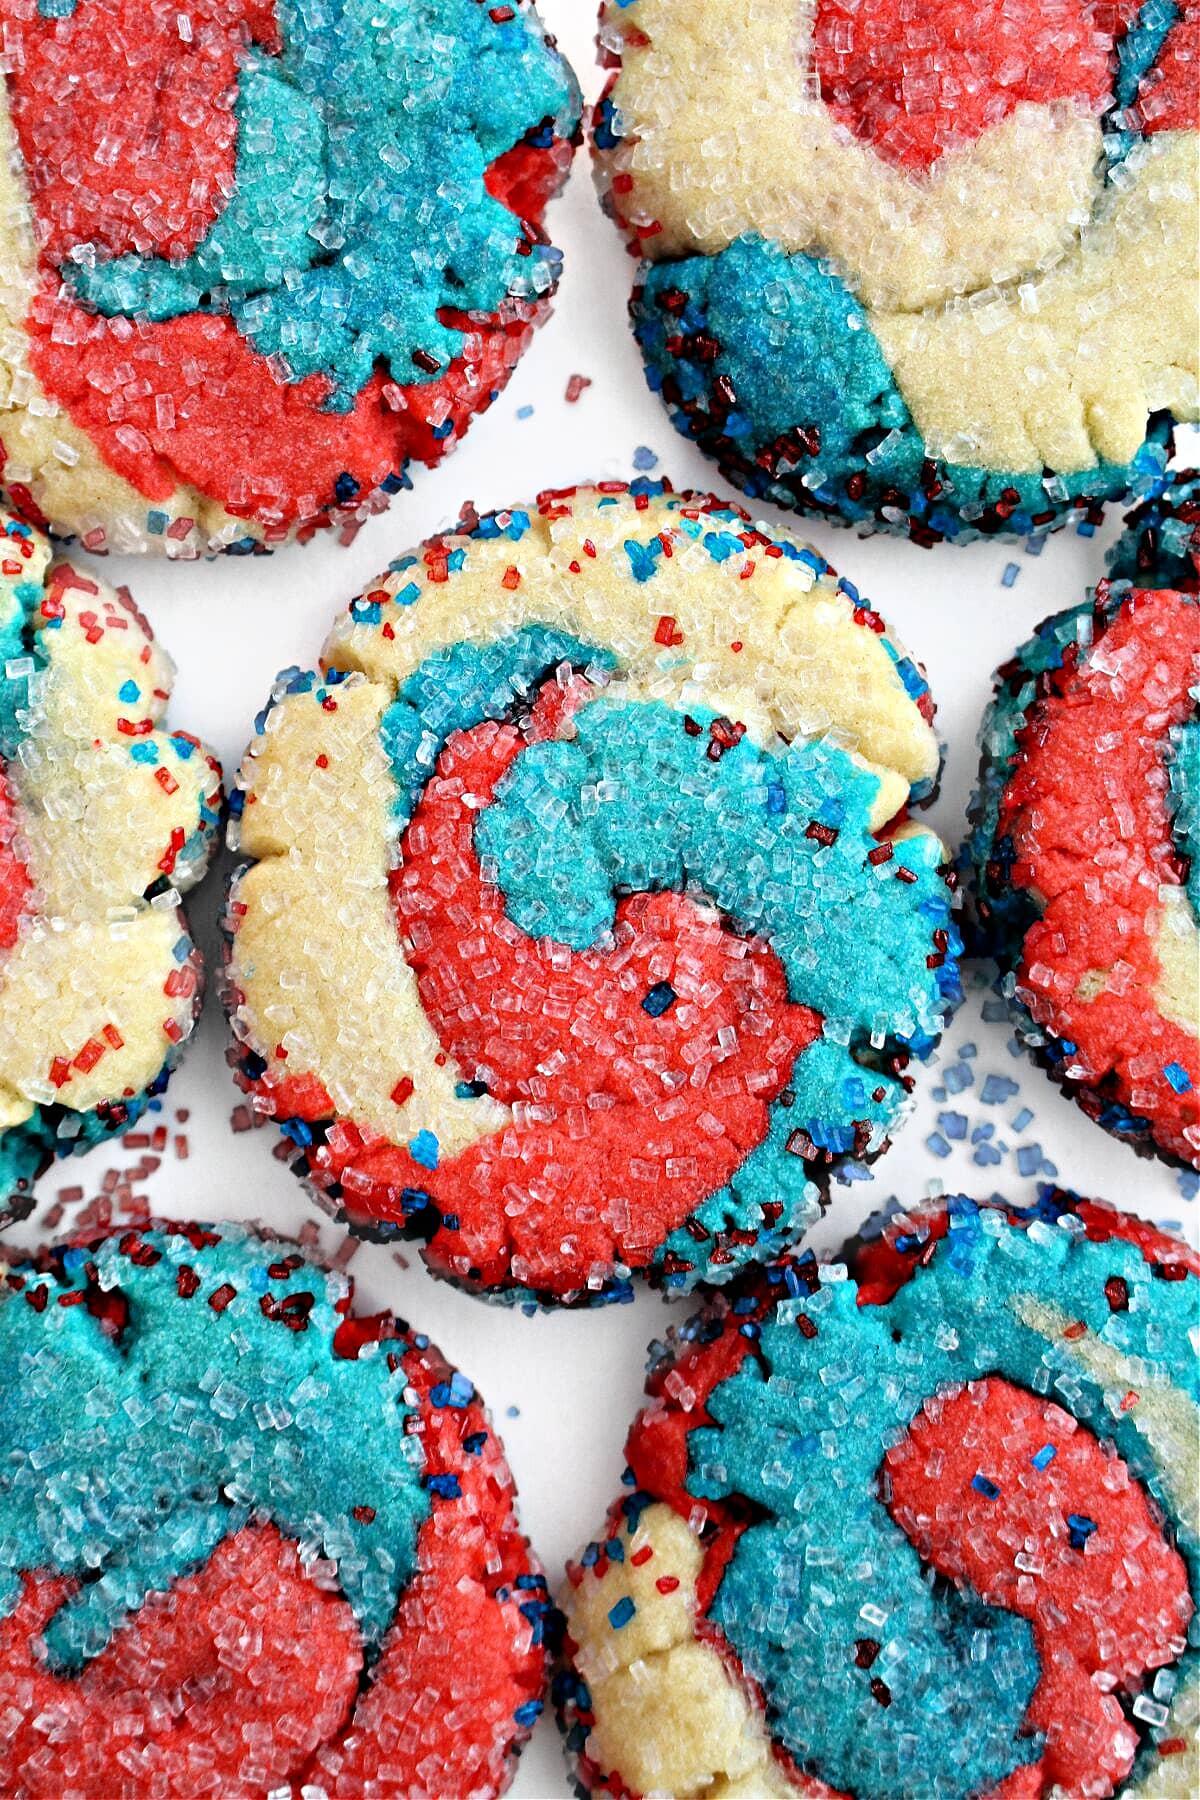 Fireworks Sugar Cookies swirled with red, white, and blue colored dough and sugar.